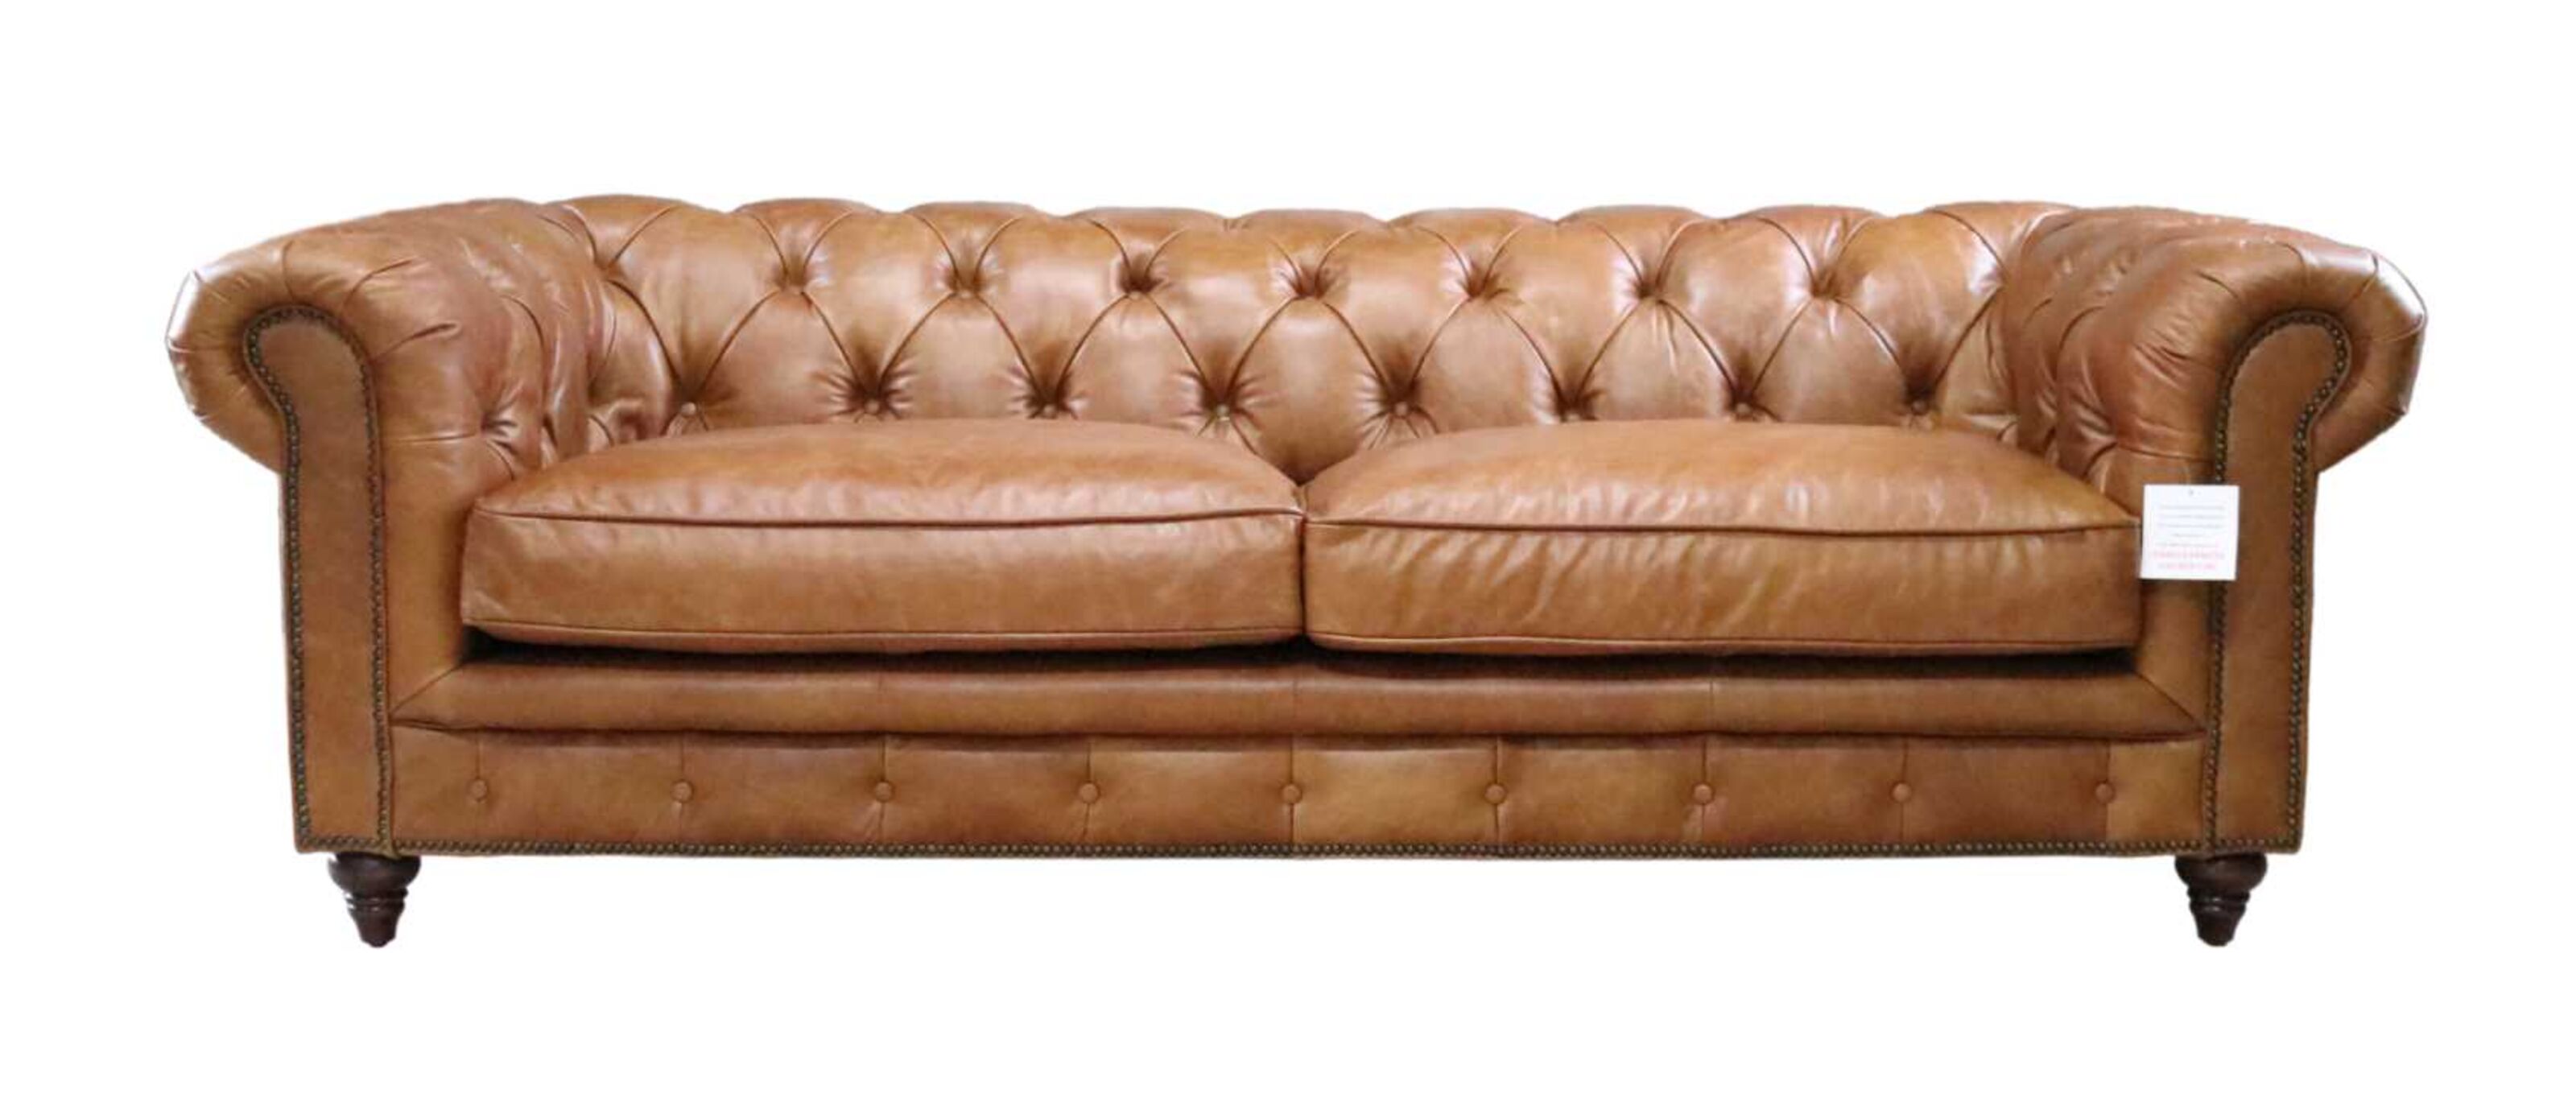 Earle Grande Chesterfield 3 Seater, Leather Couch Brown